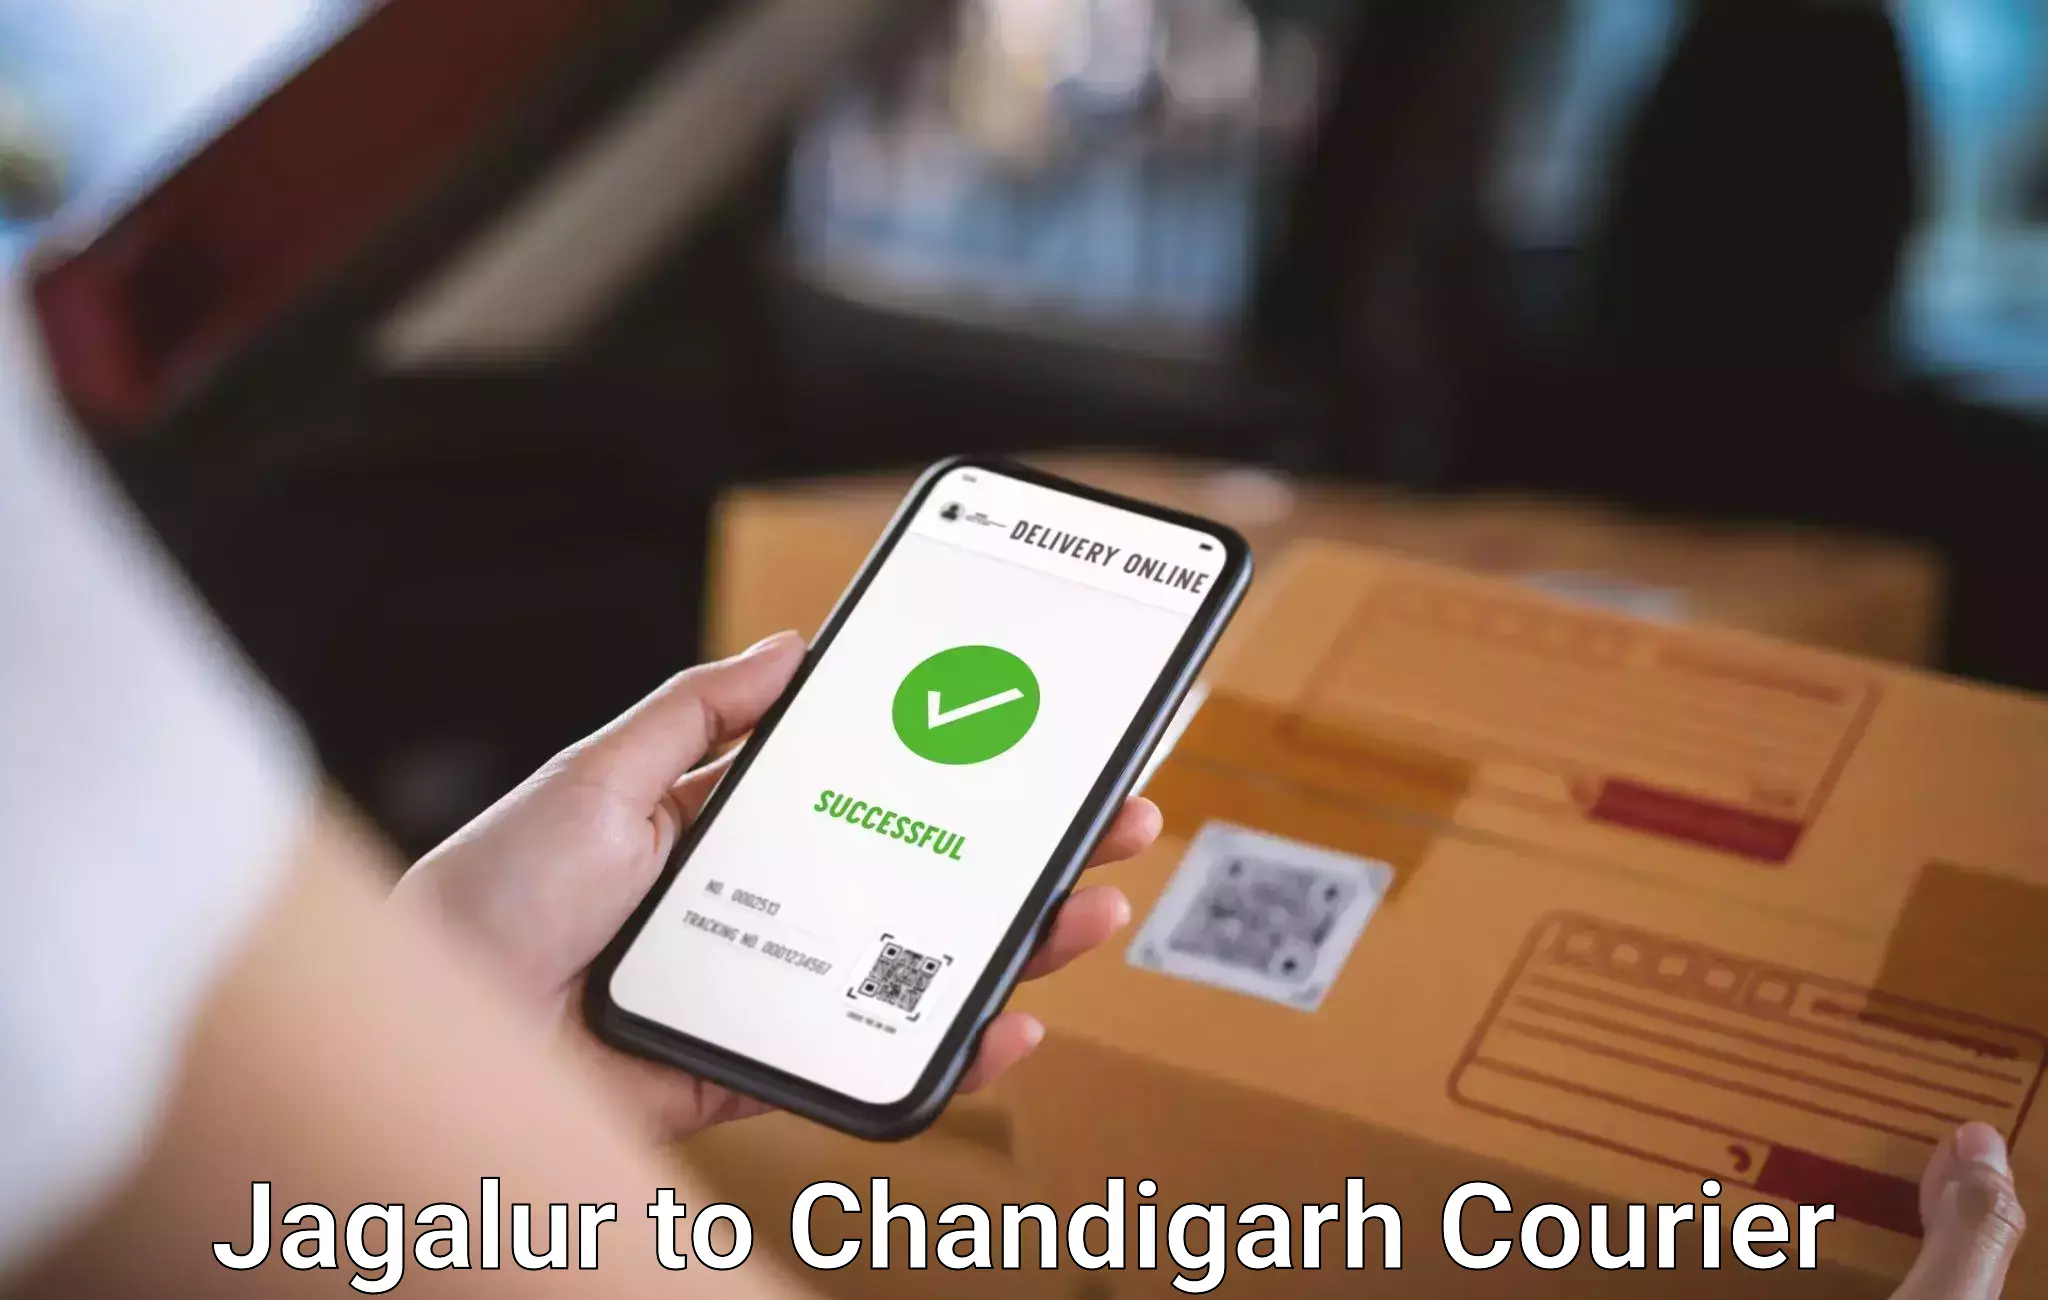 Baggage transport network Jagalur to Chandigarh